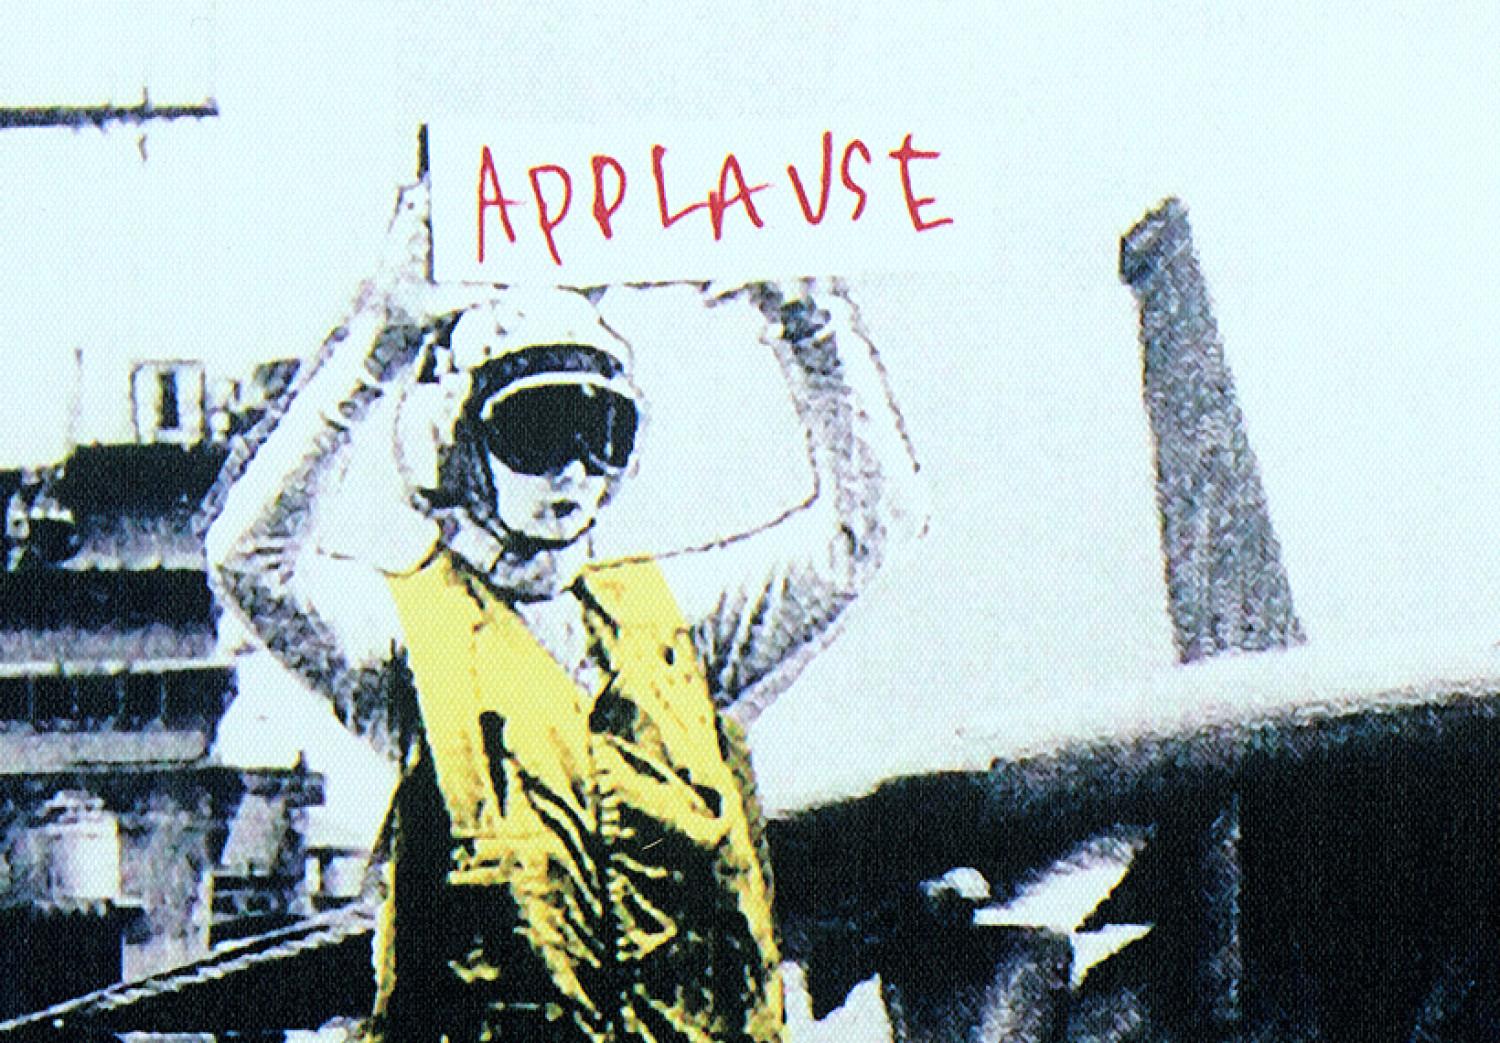 Cuadro Applause by Banksy